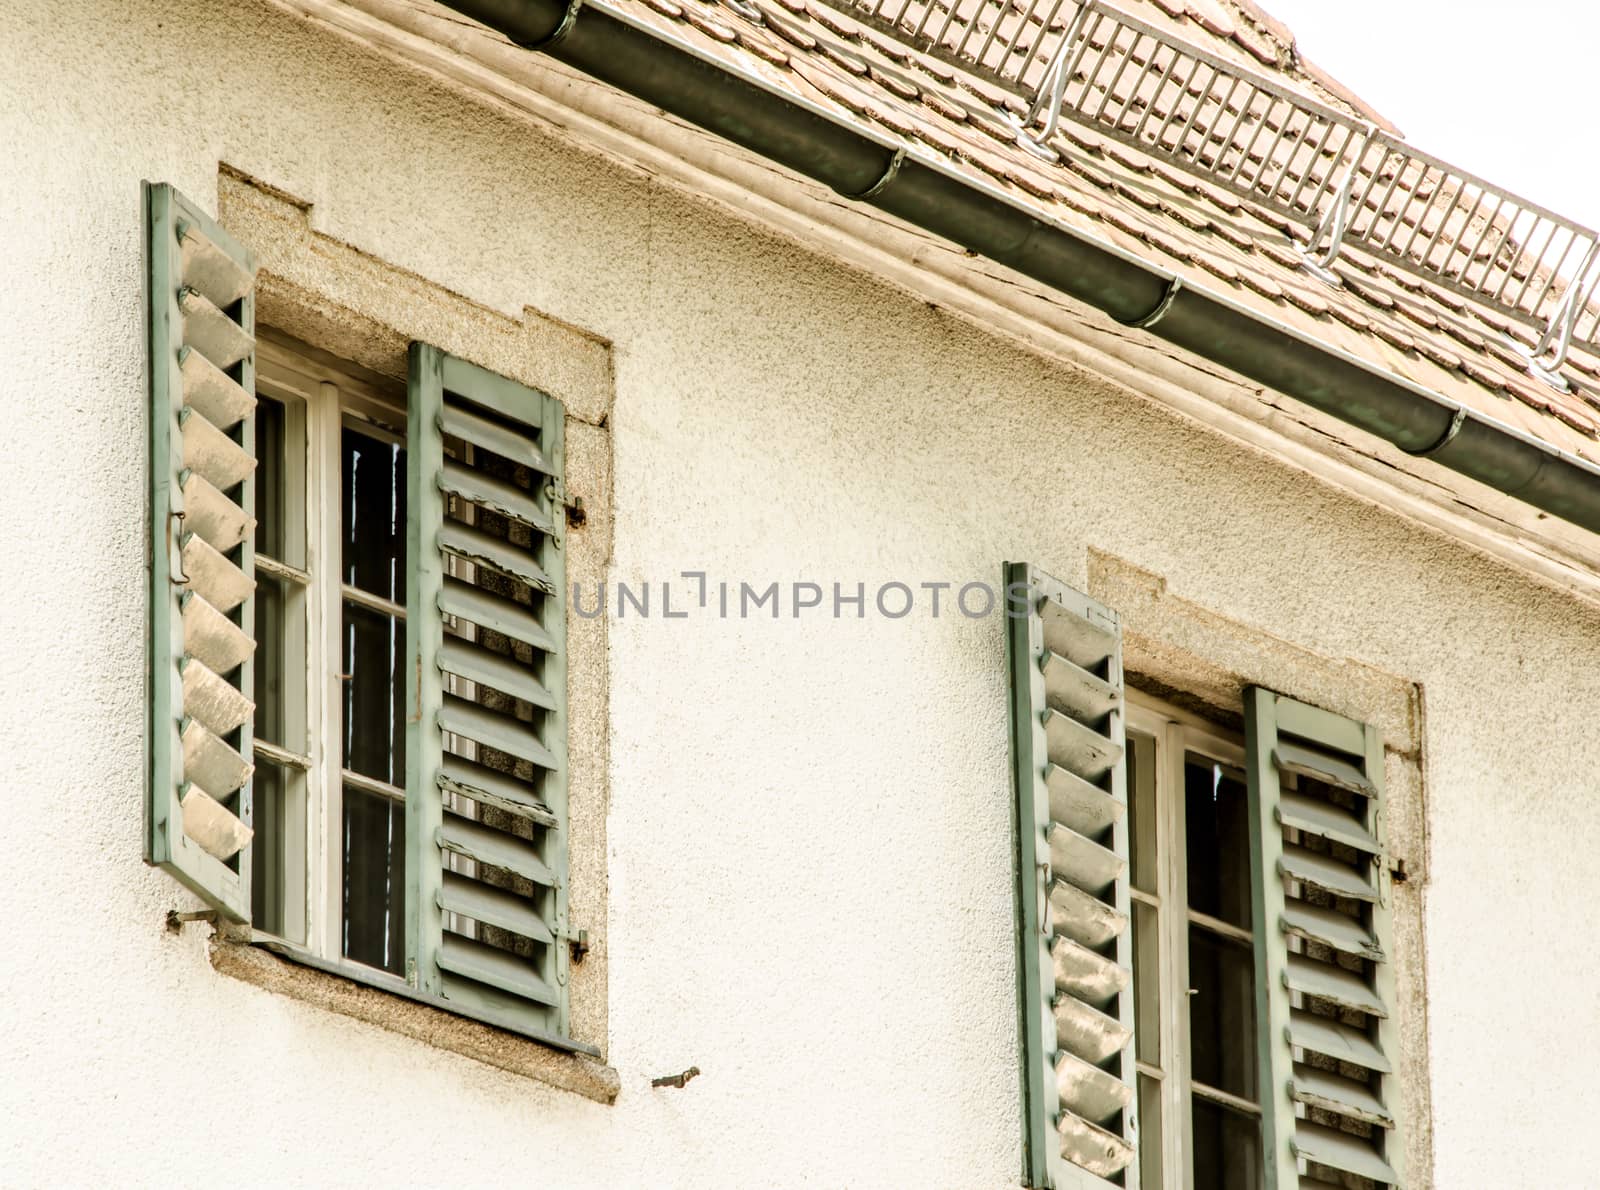 Two windows with green window shutters and old roof.
